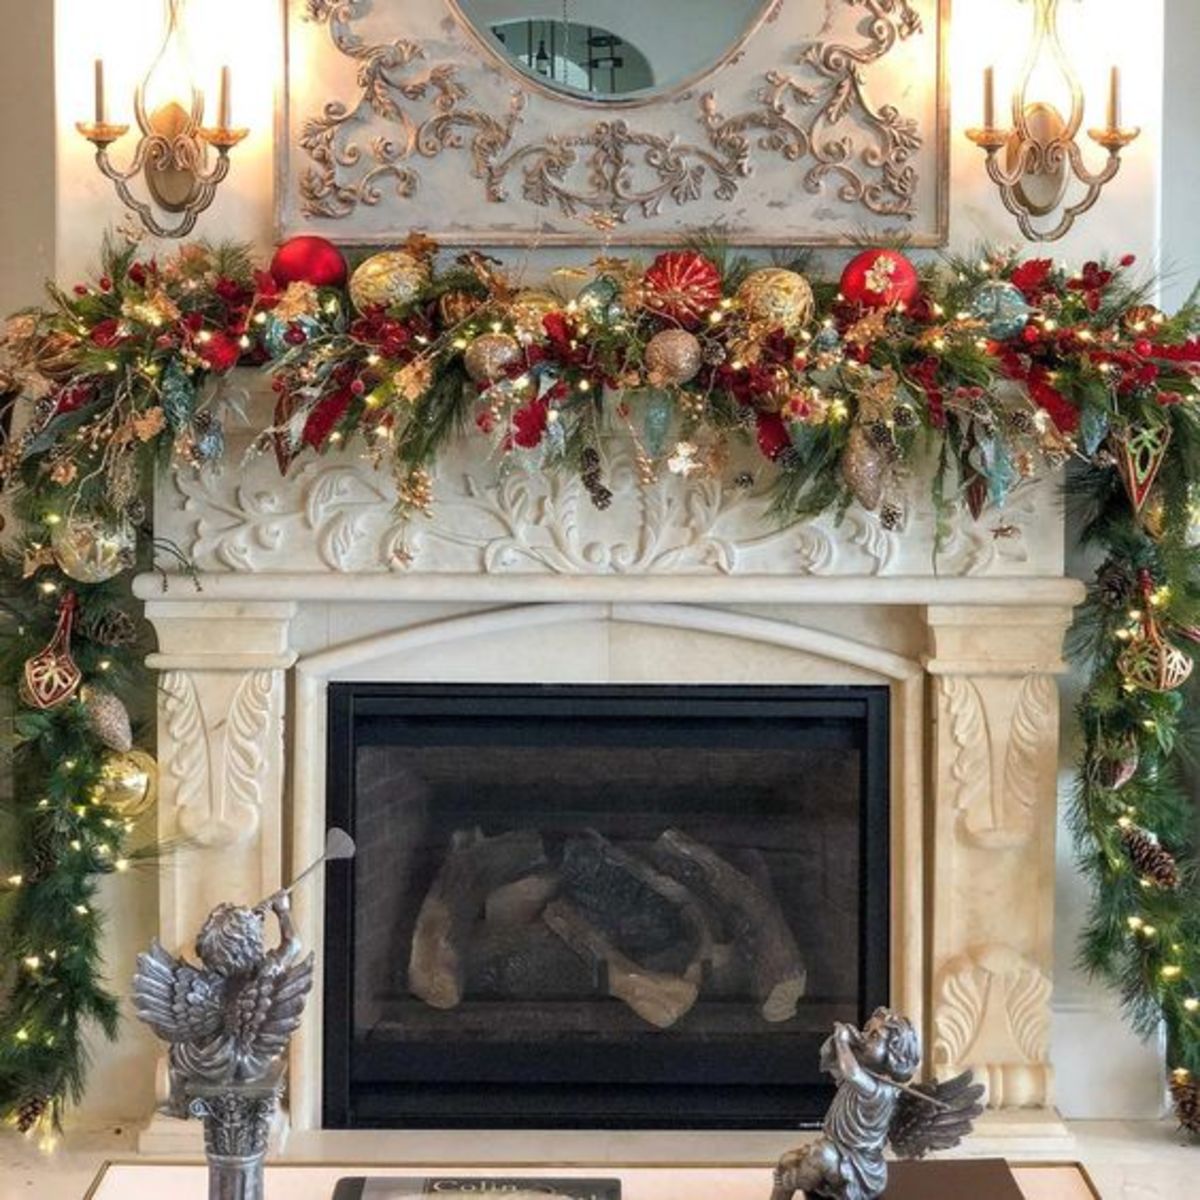 Artistic Mantel With Ornament-Bedecked Garland